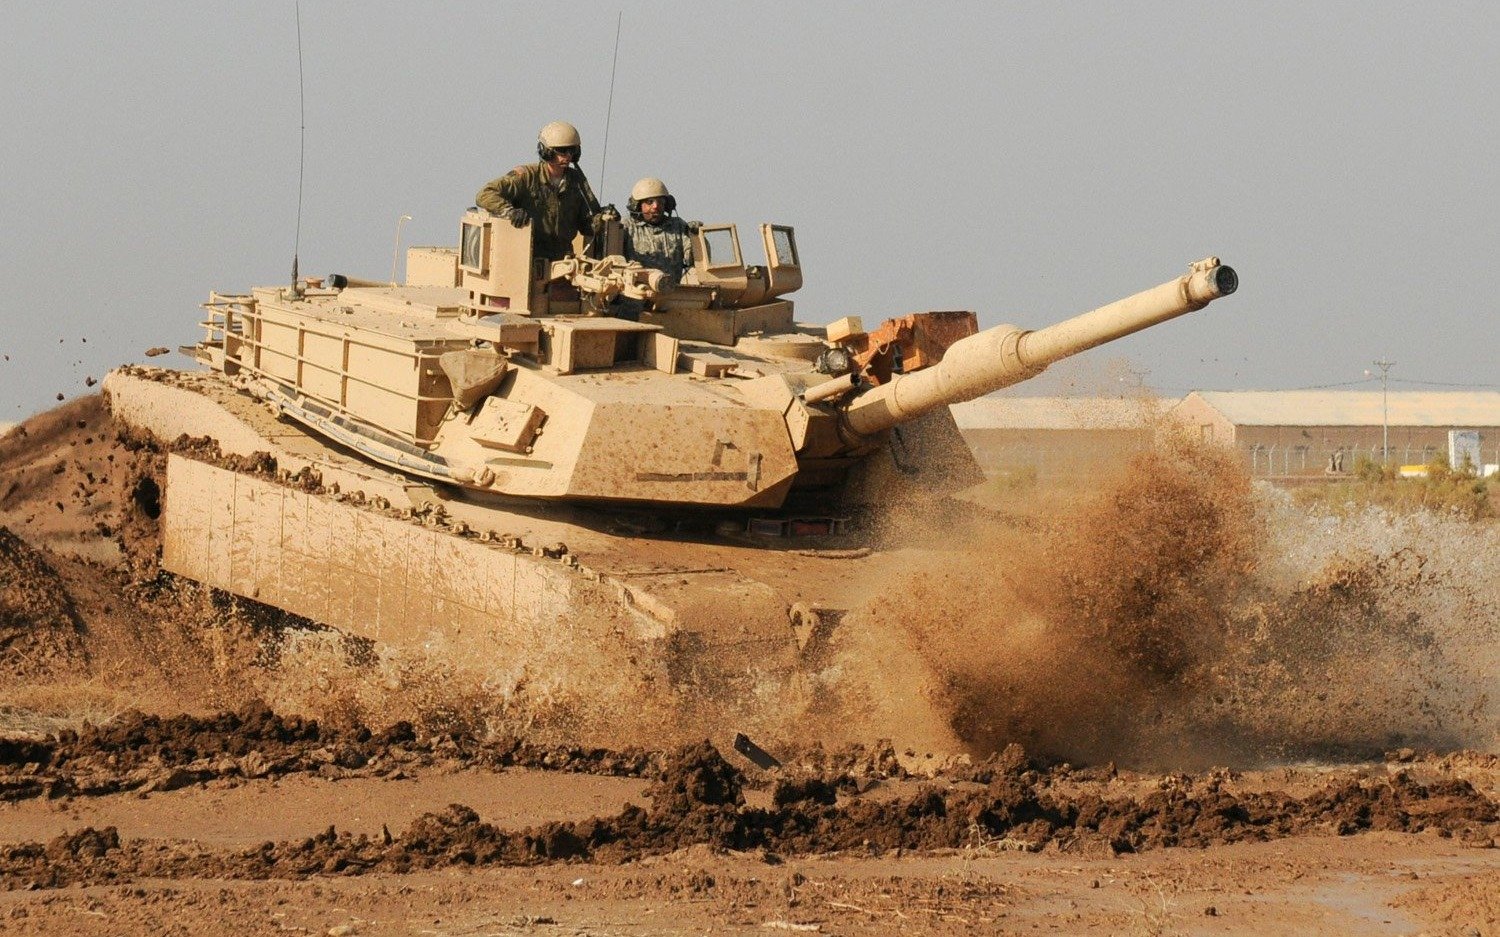 The U.S. Army's M1 Abrams Tank: A Complete History of the Best Tank Ever